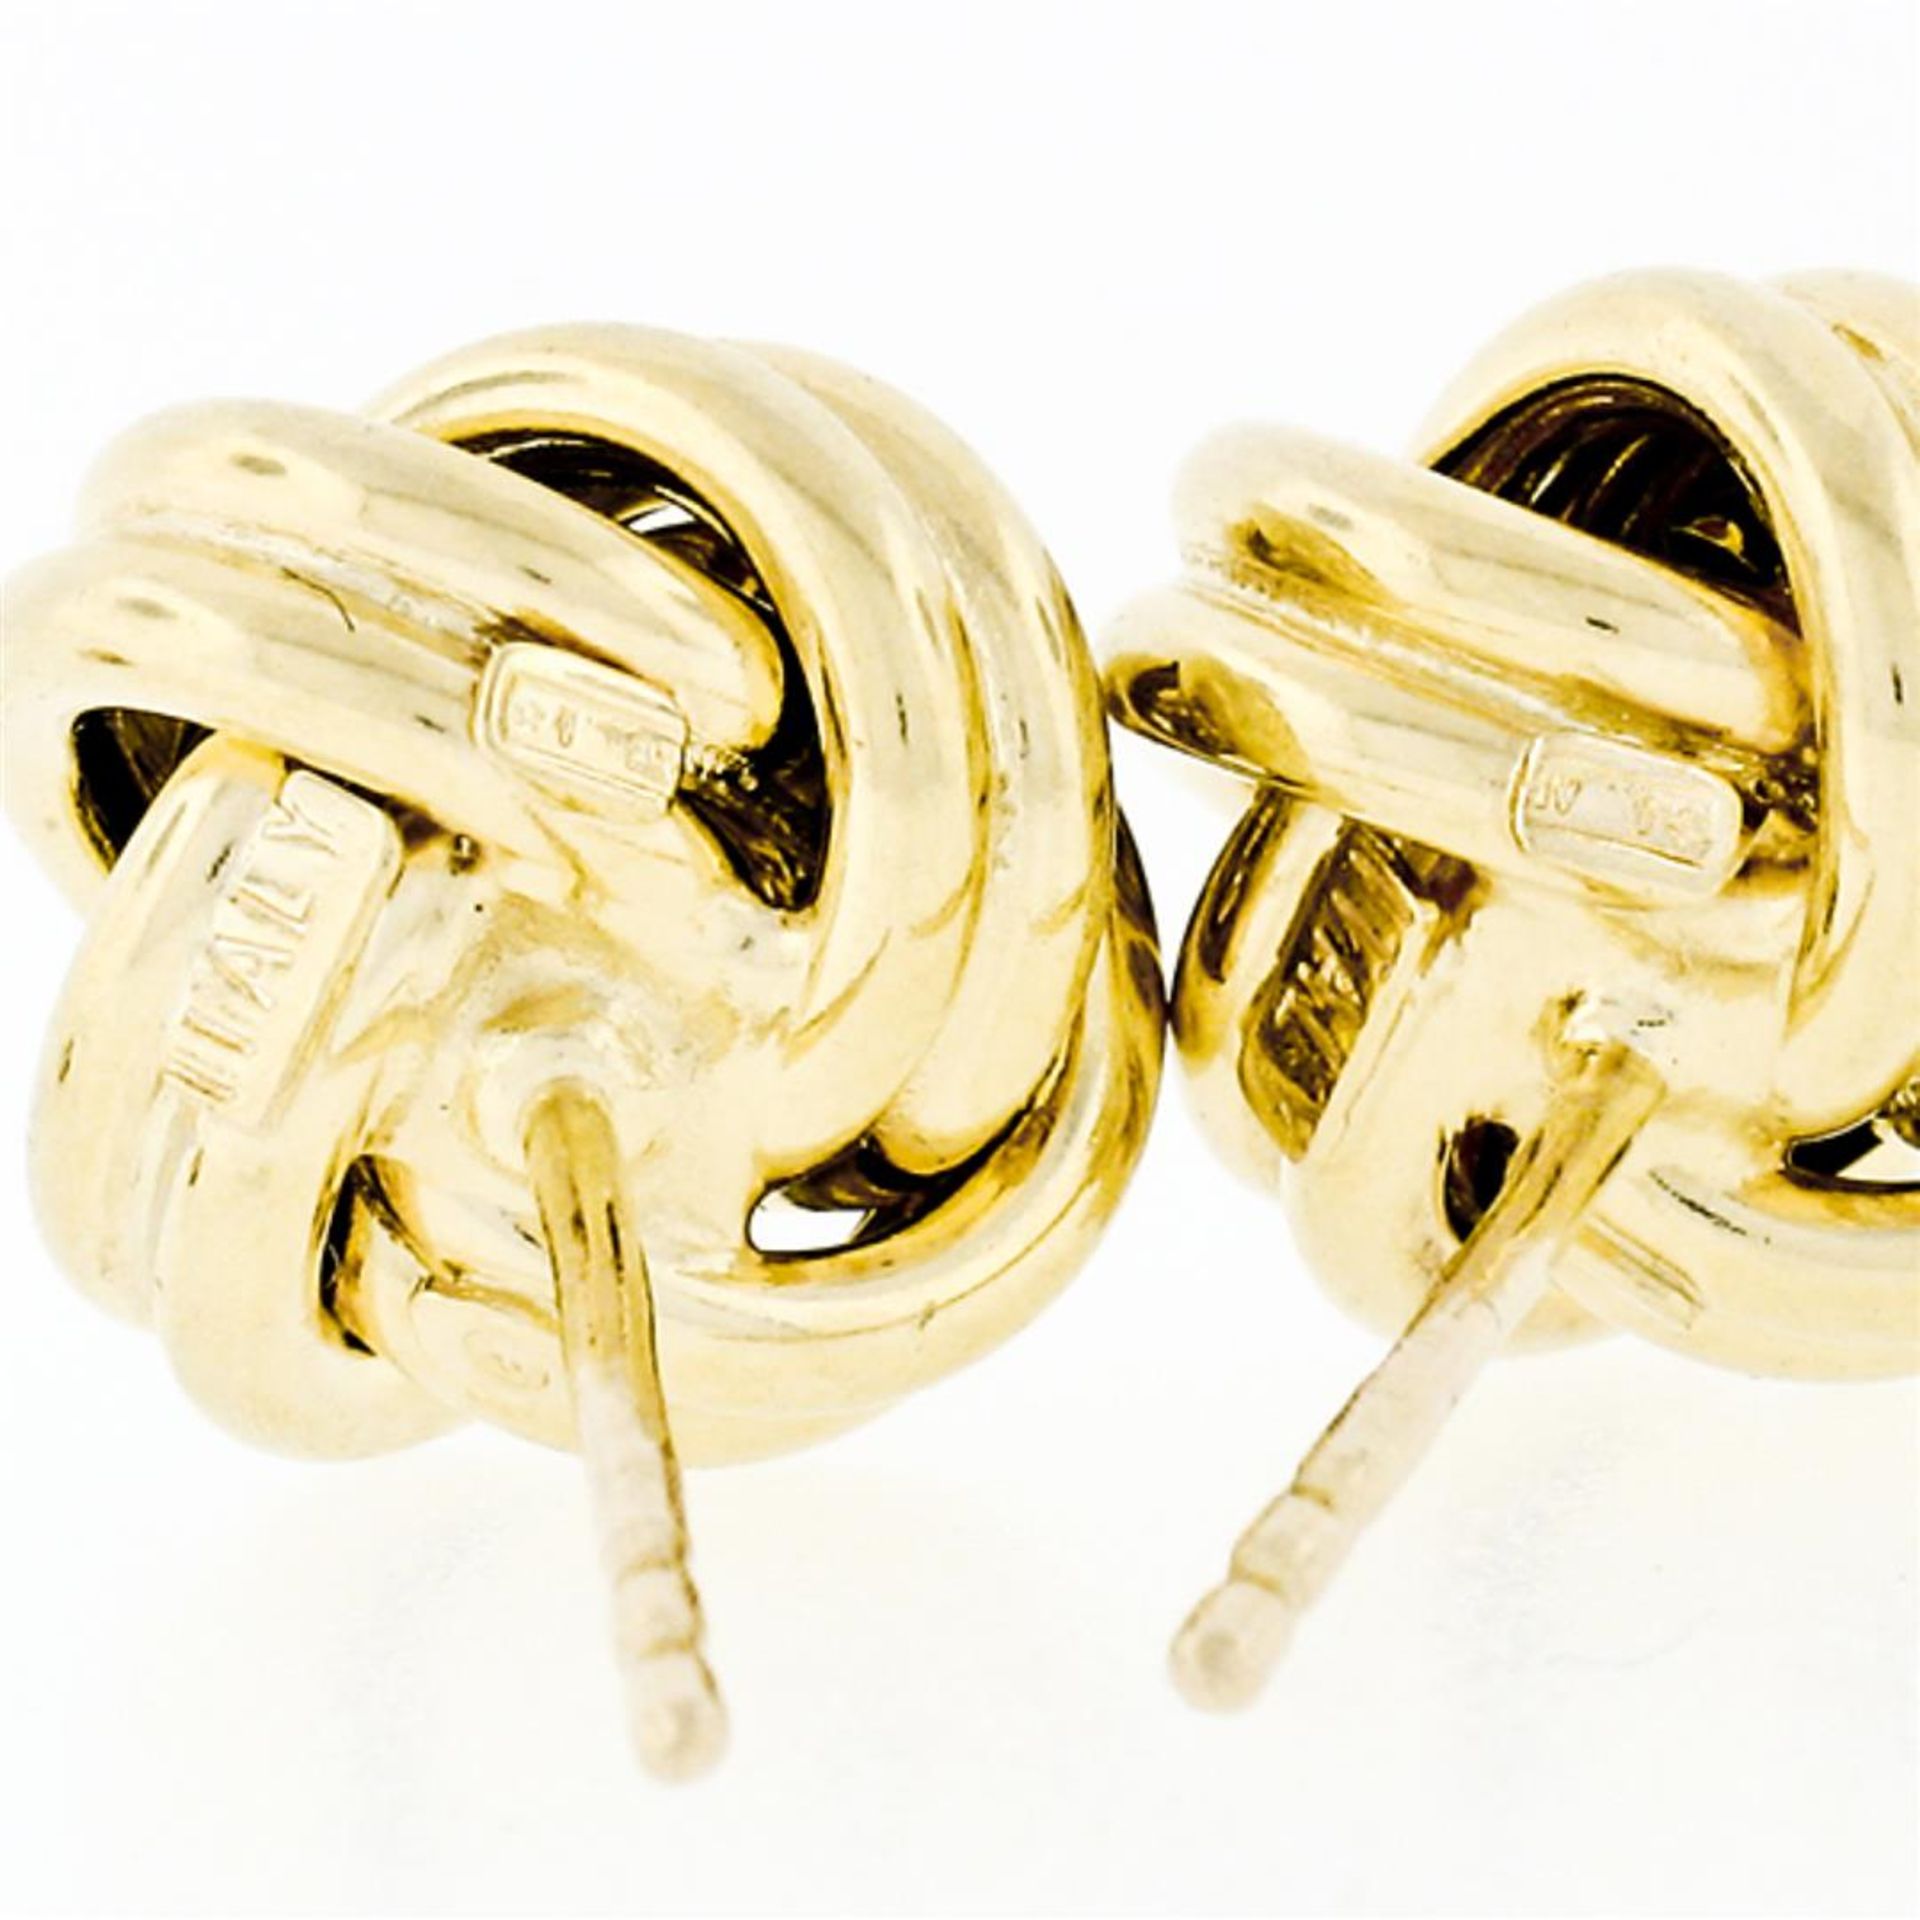 Italian 14K Yellow Gold Ribbed High Polished Dual Tube Love Knot Stud Earrings - Image 6 of 6